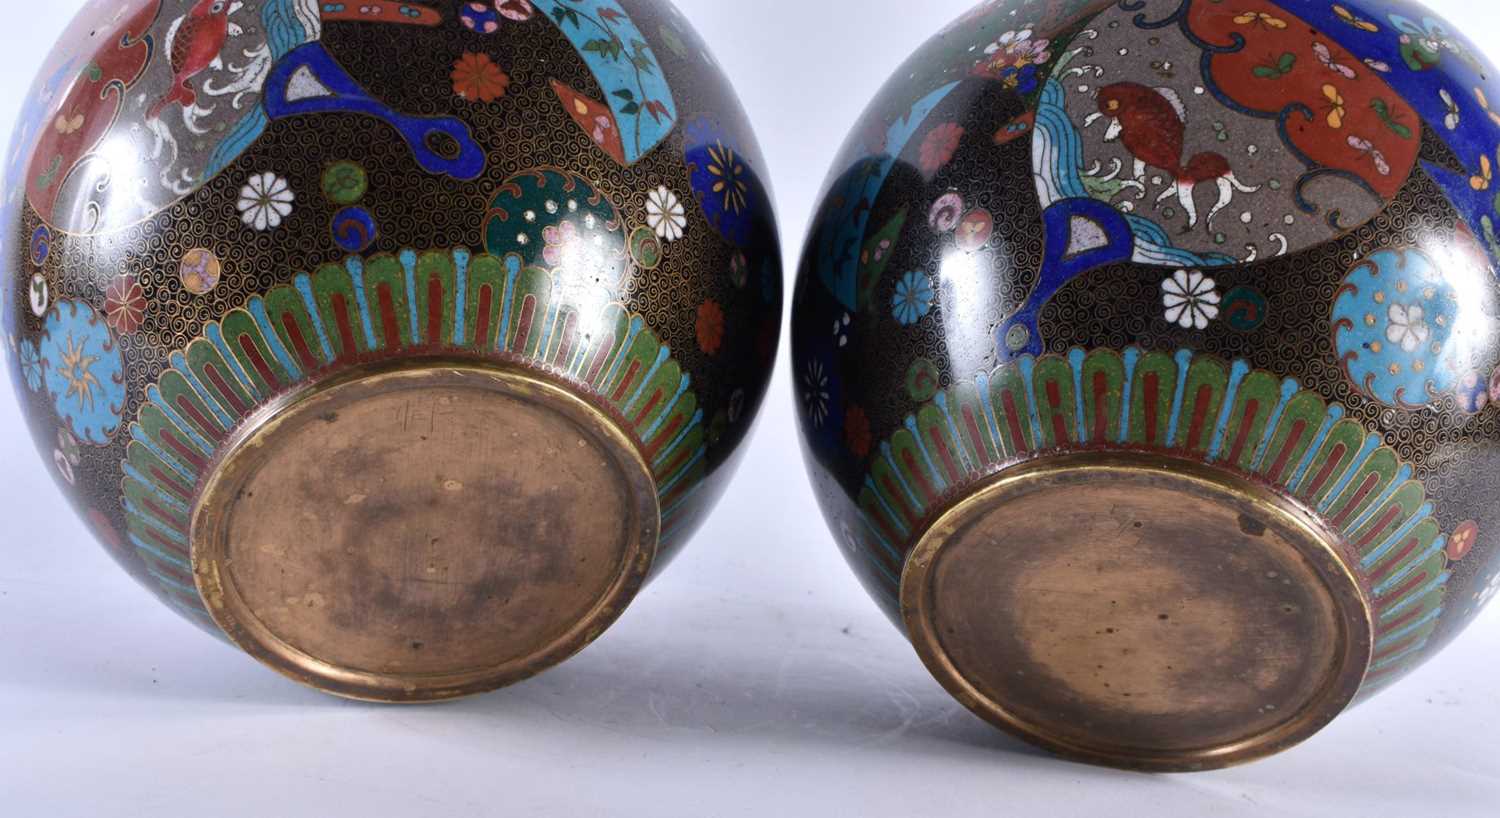 A LARGE PAIR OF 19TH CENTURY JAPANESE MEIJI PERIOD CLOISONNE ENAMEL VASES decorative with panels - Image 5 of 5